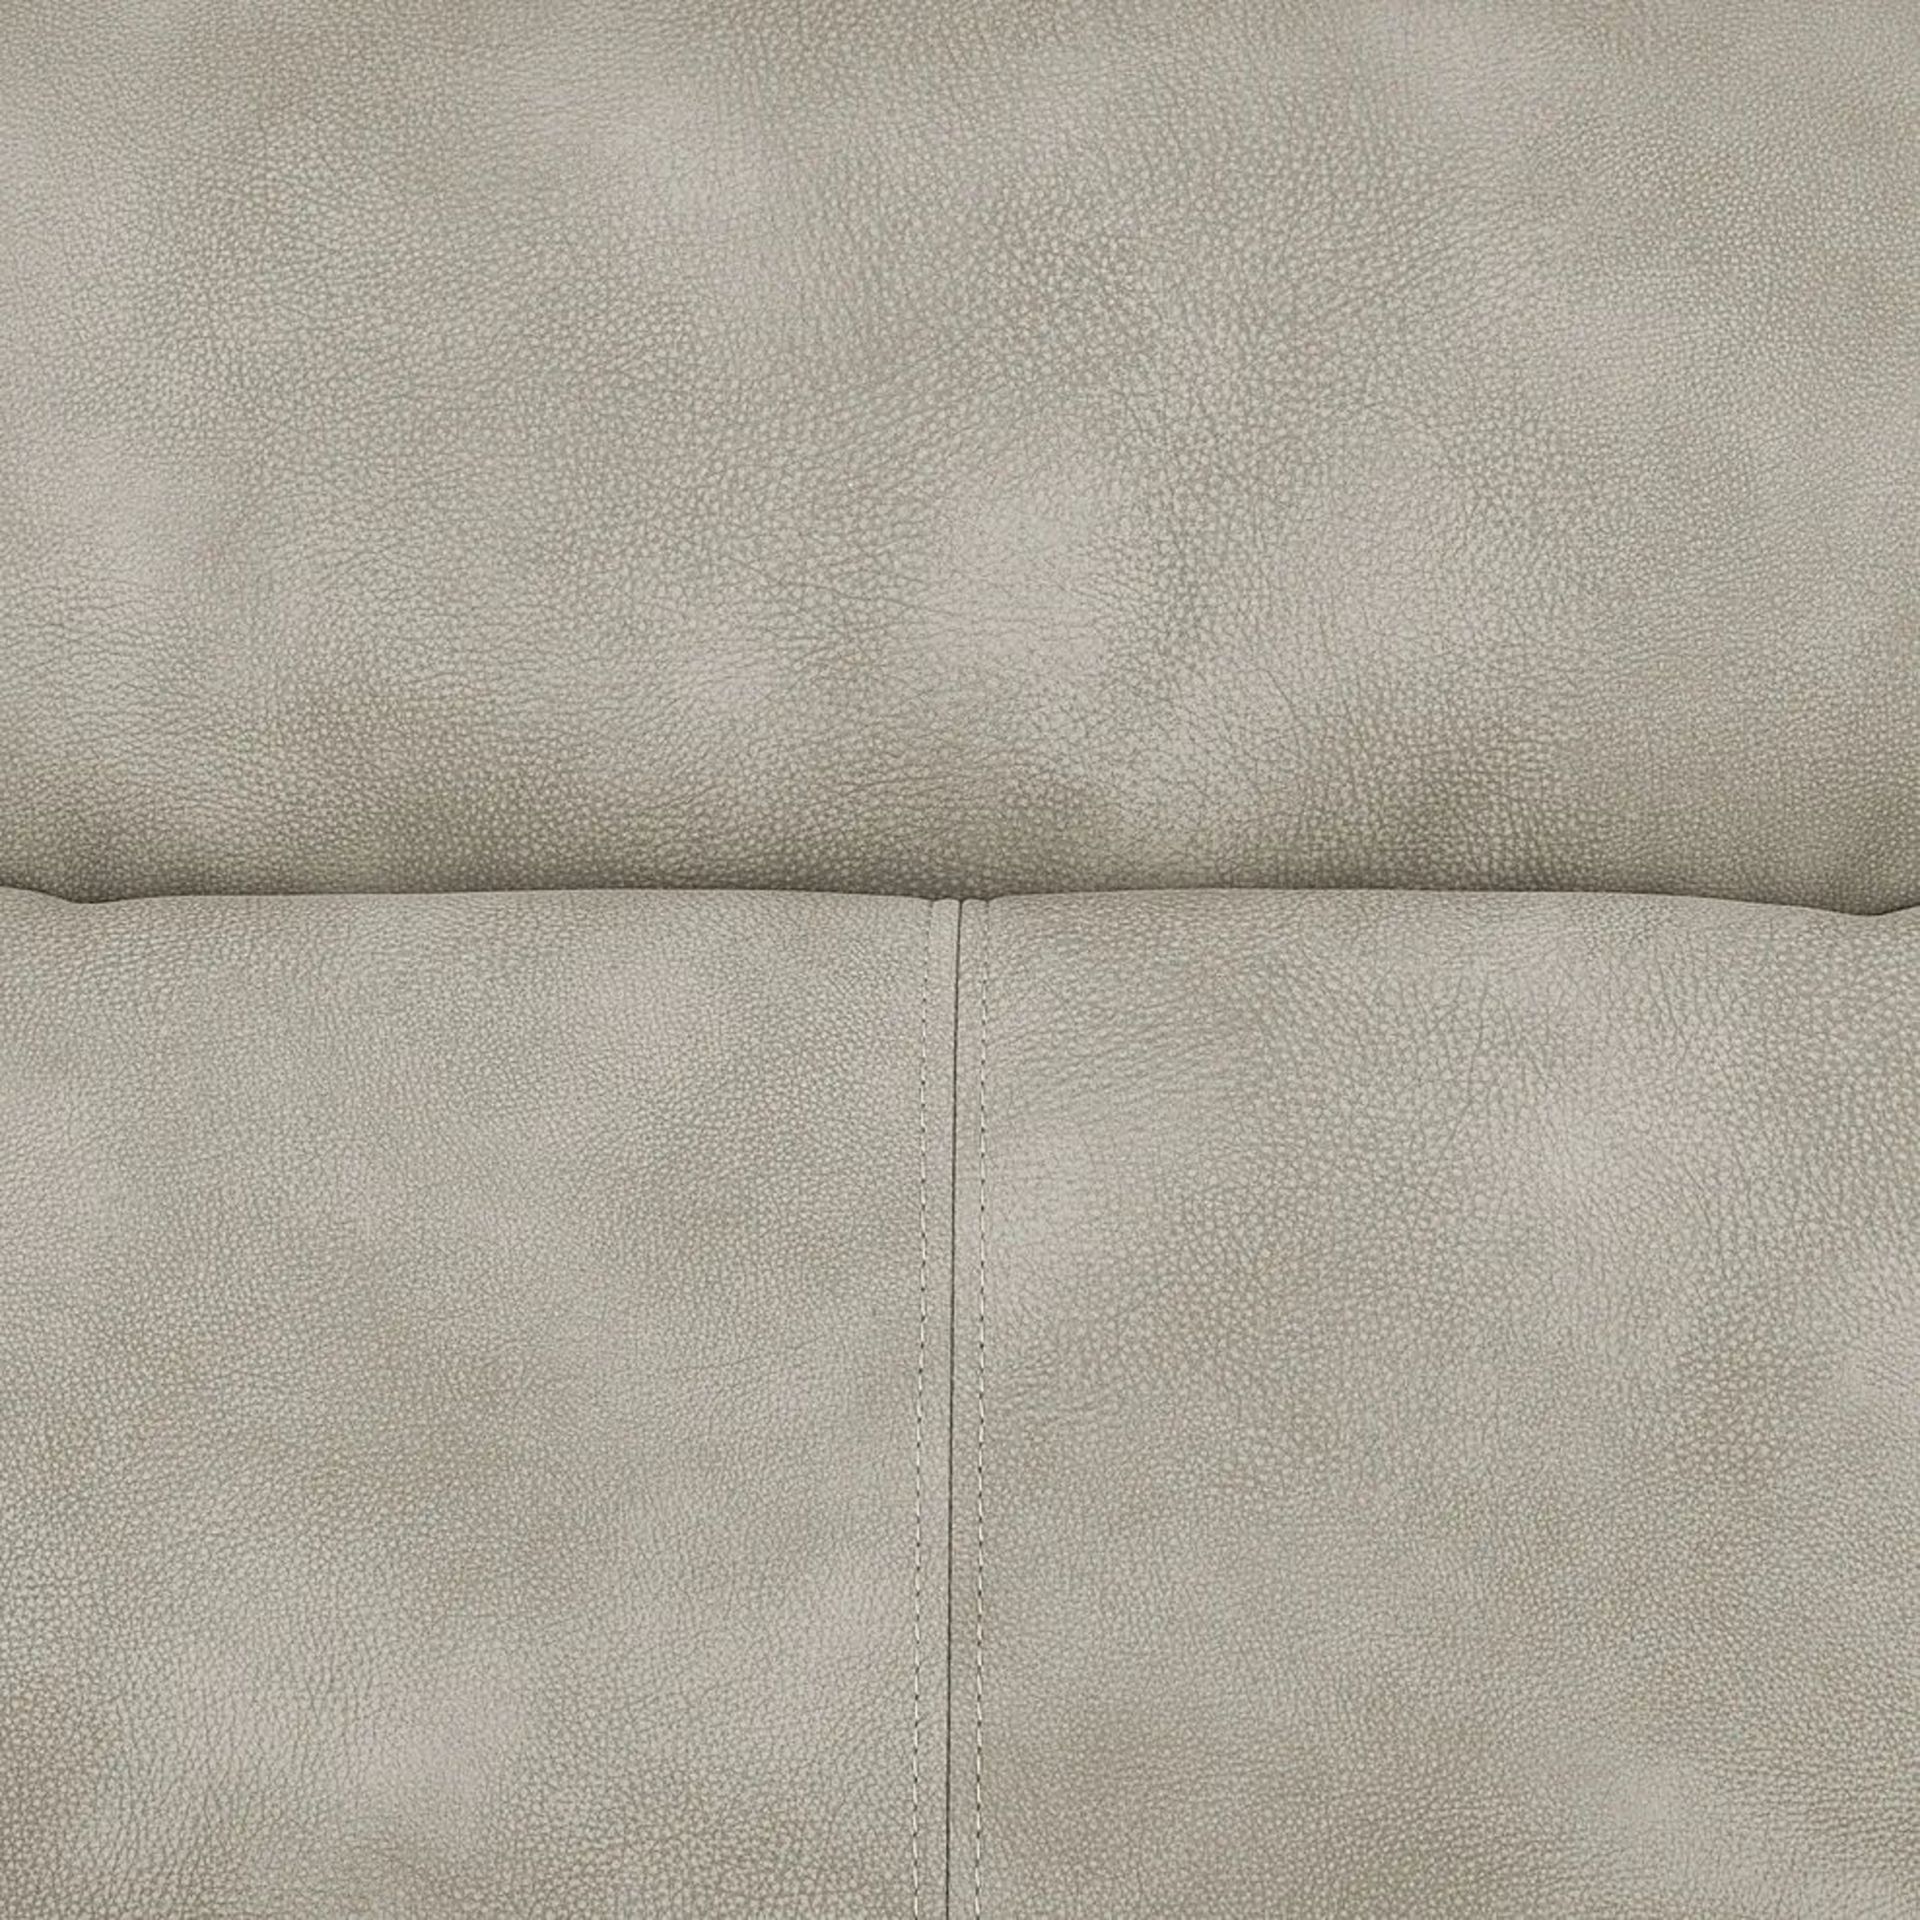 BRAND NEW DYLAN Static Armchair - OXFORD BEIGE FABRIC. RRP £749. Our Dylan armchair, shown here in - Image 6 of 8